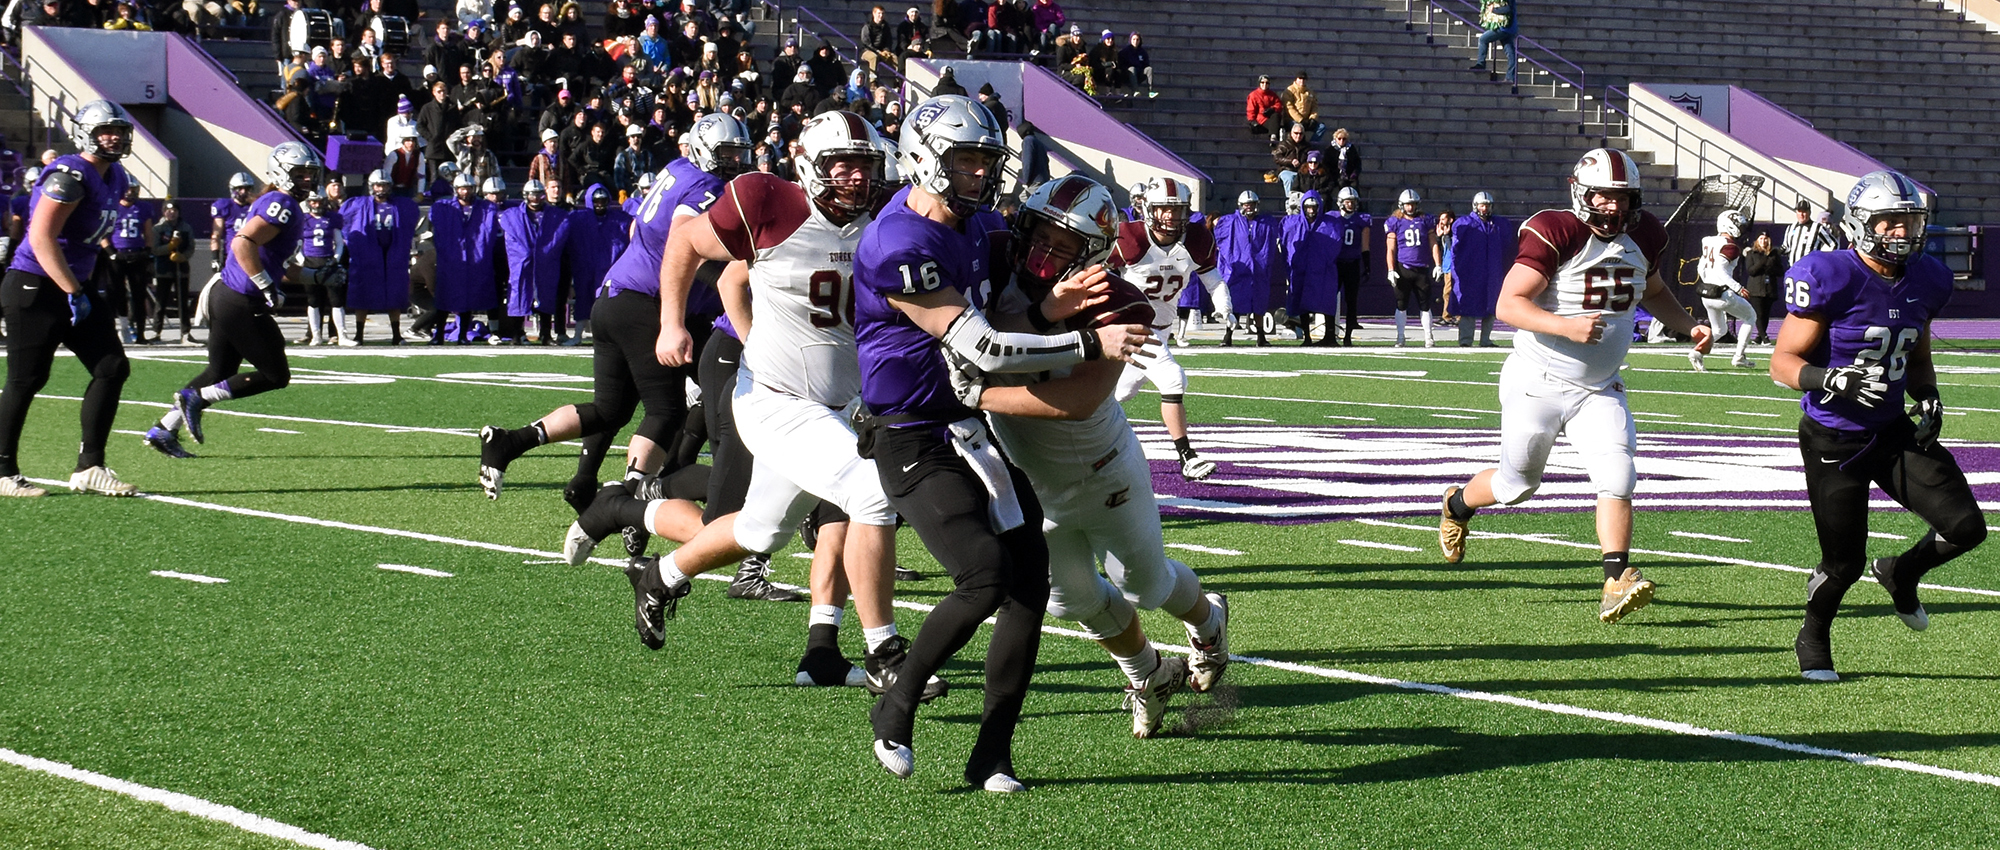 St. Thomas Ousts Eureka From NCAA Playoffs, 47-8